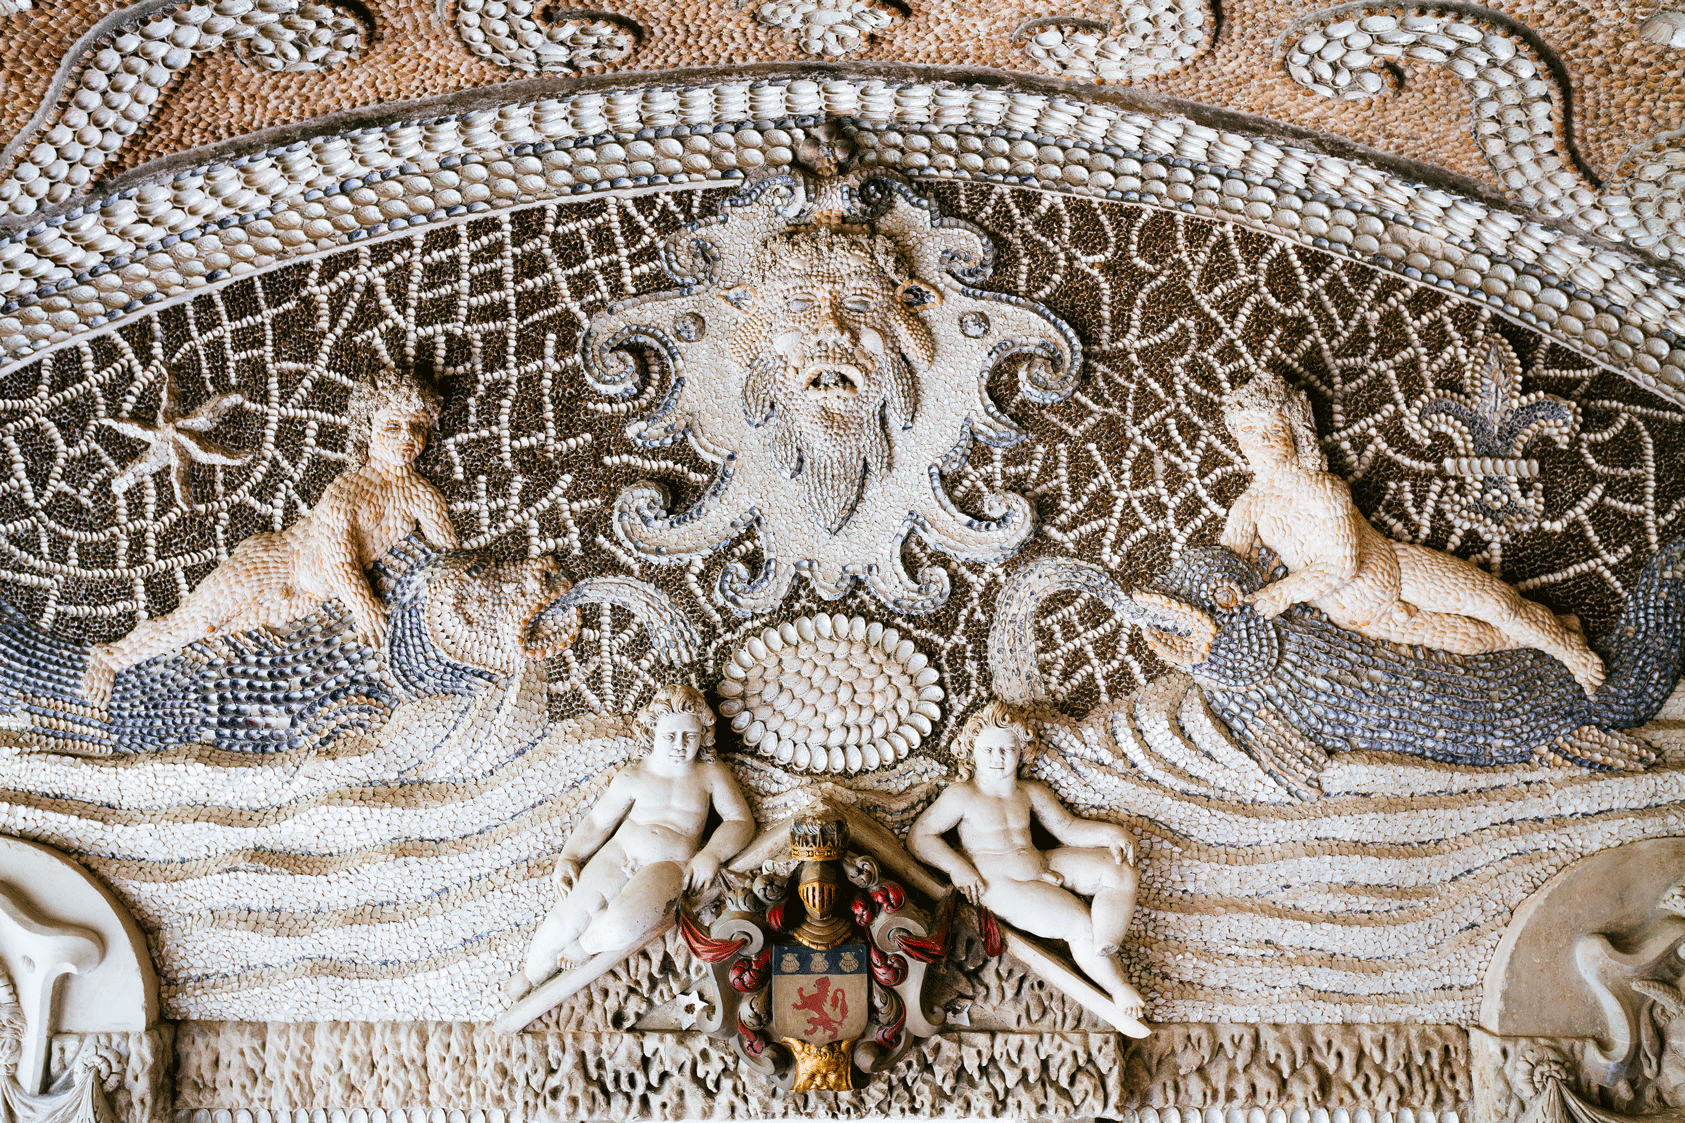 The ornate ceiling of Woburn Abbey's shell grotto